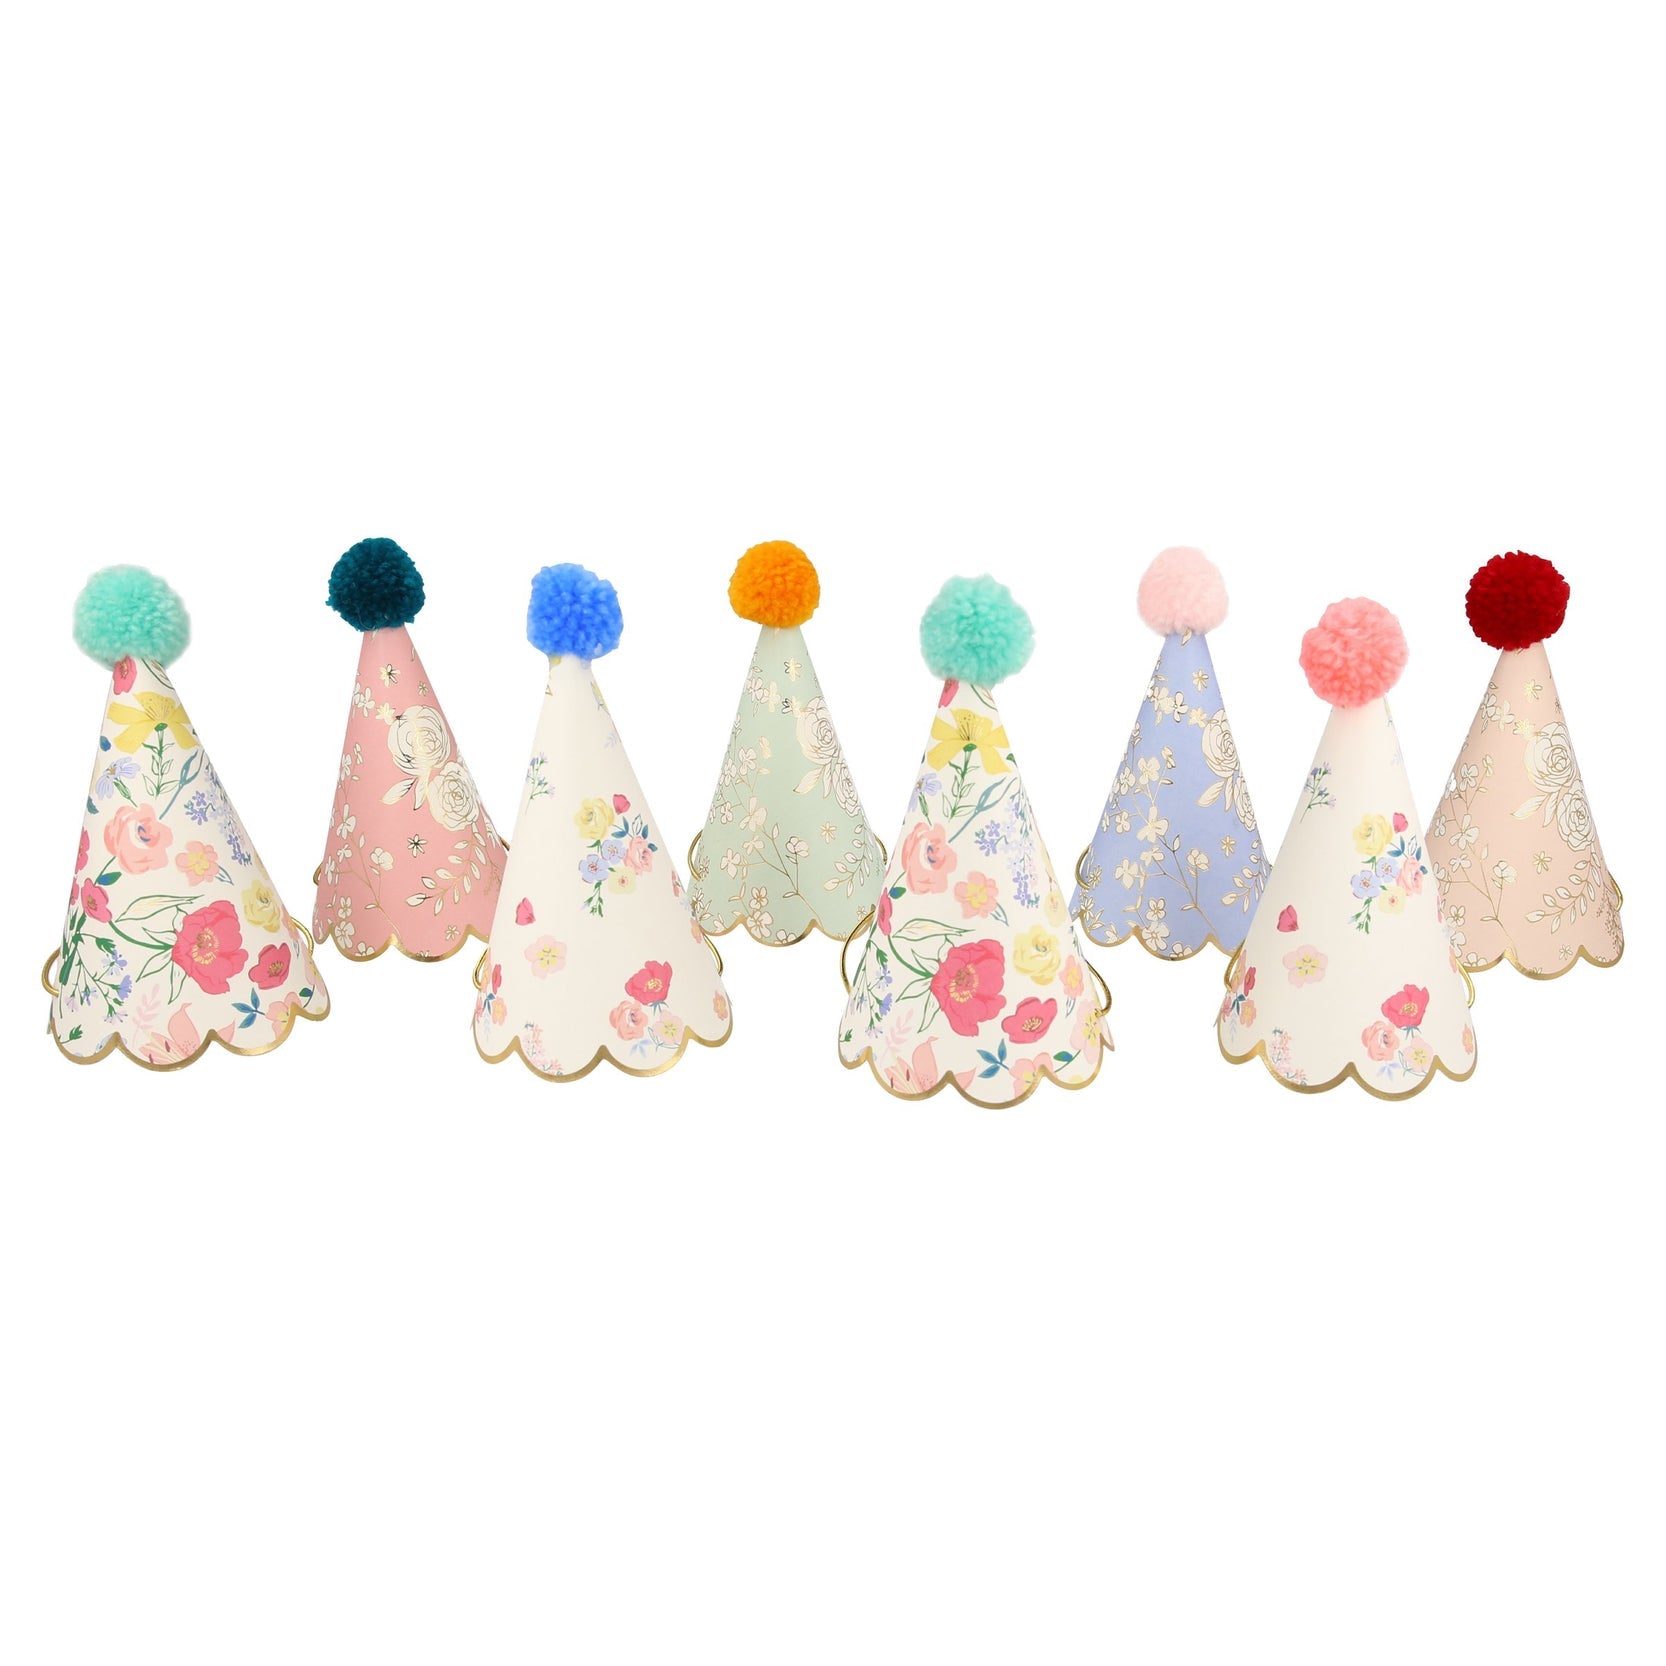 A group of Meri Meri English Garden Party Hats Set of 8 with pom poms showcases elegant floral patterns.